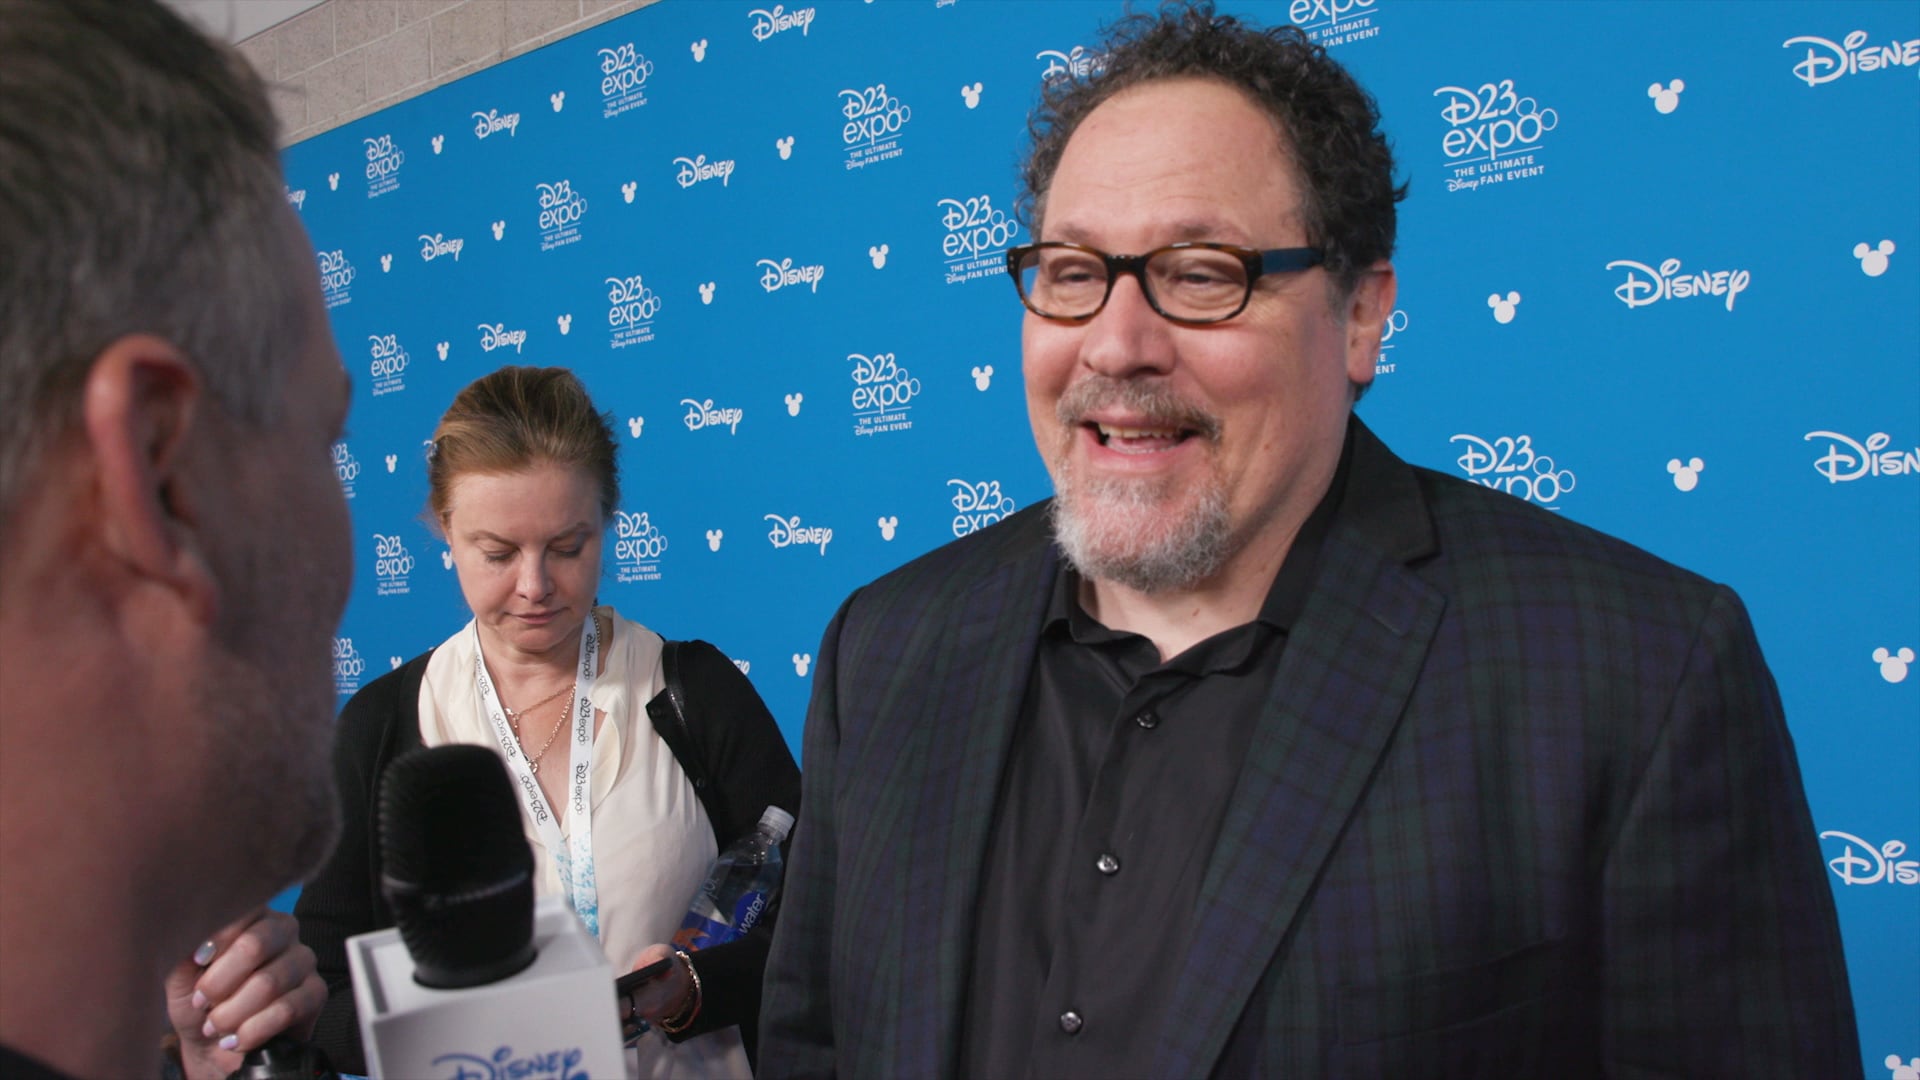 A man interviewing filmmaker Jon Favreau in front of a backdrop with logos that read ‘D23 Expo’ and ‘Disney’